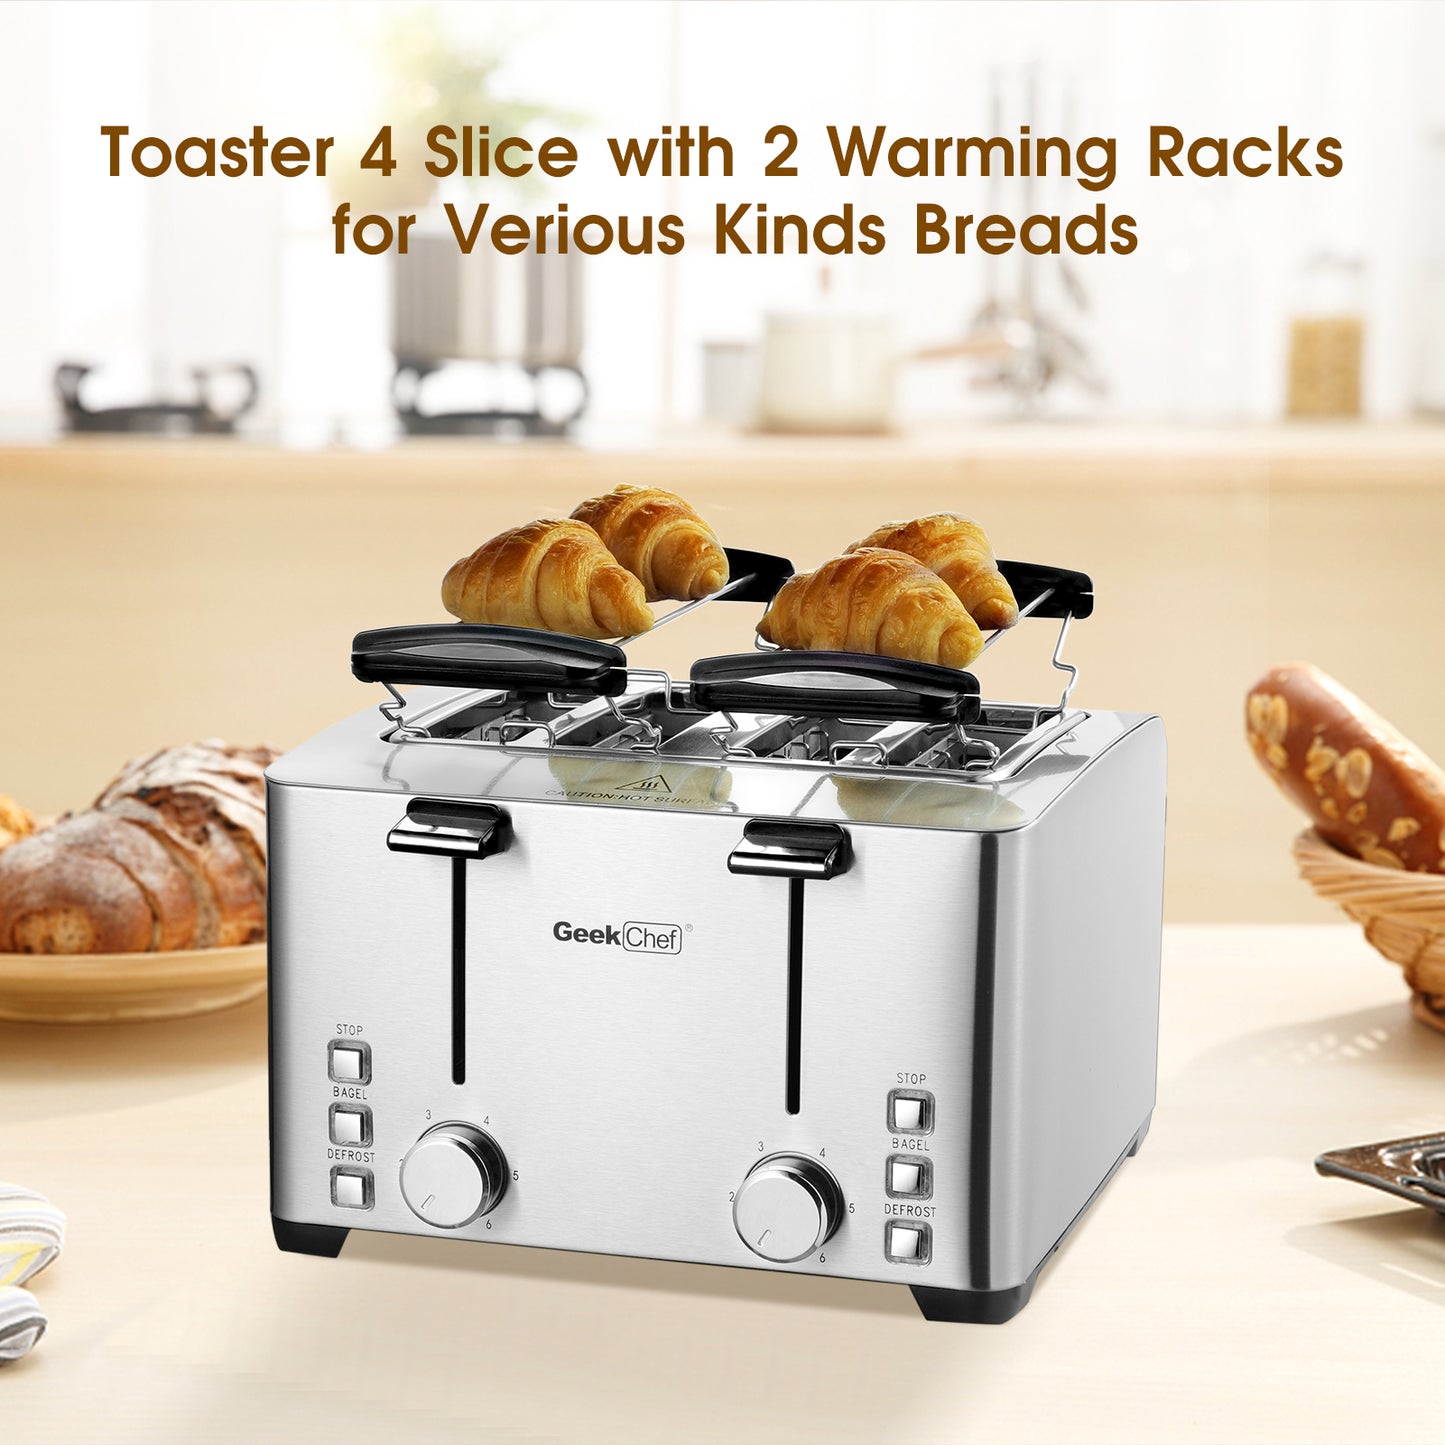 Geek Chef 4 Slice Toaster, Stainless Steel Bread Bagel Toaster with Warming Rack, 6 Shade Settings, 4 Extra Wide Slots, Removable Crumb Tray, Bagel/Defrost/Stop Function, 1500W